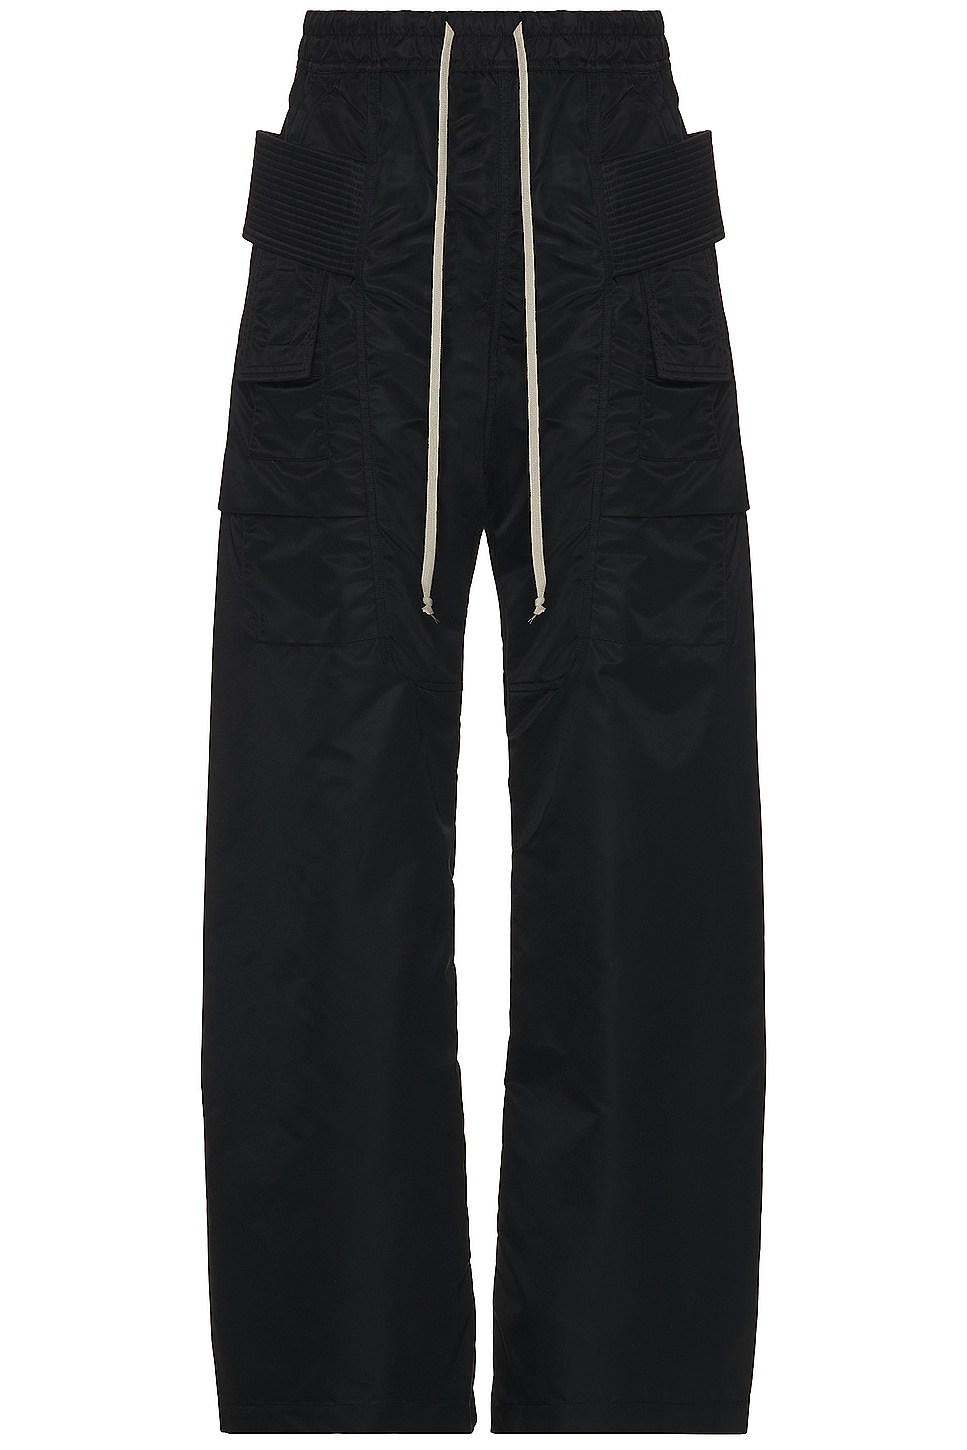 Image 1 of DRKSHDW by Rick Owens Creatch Cargo Wide Pant in Black